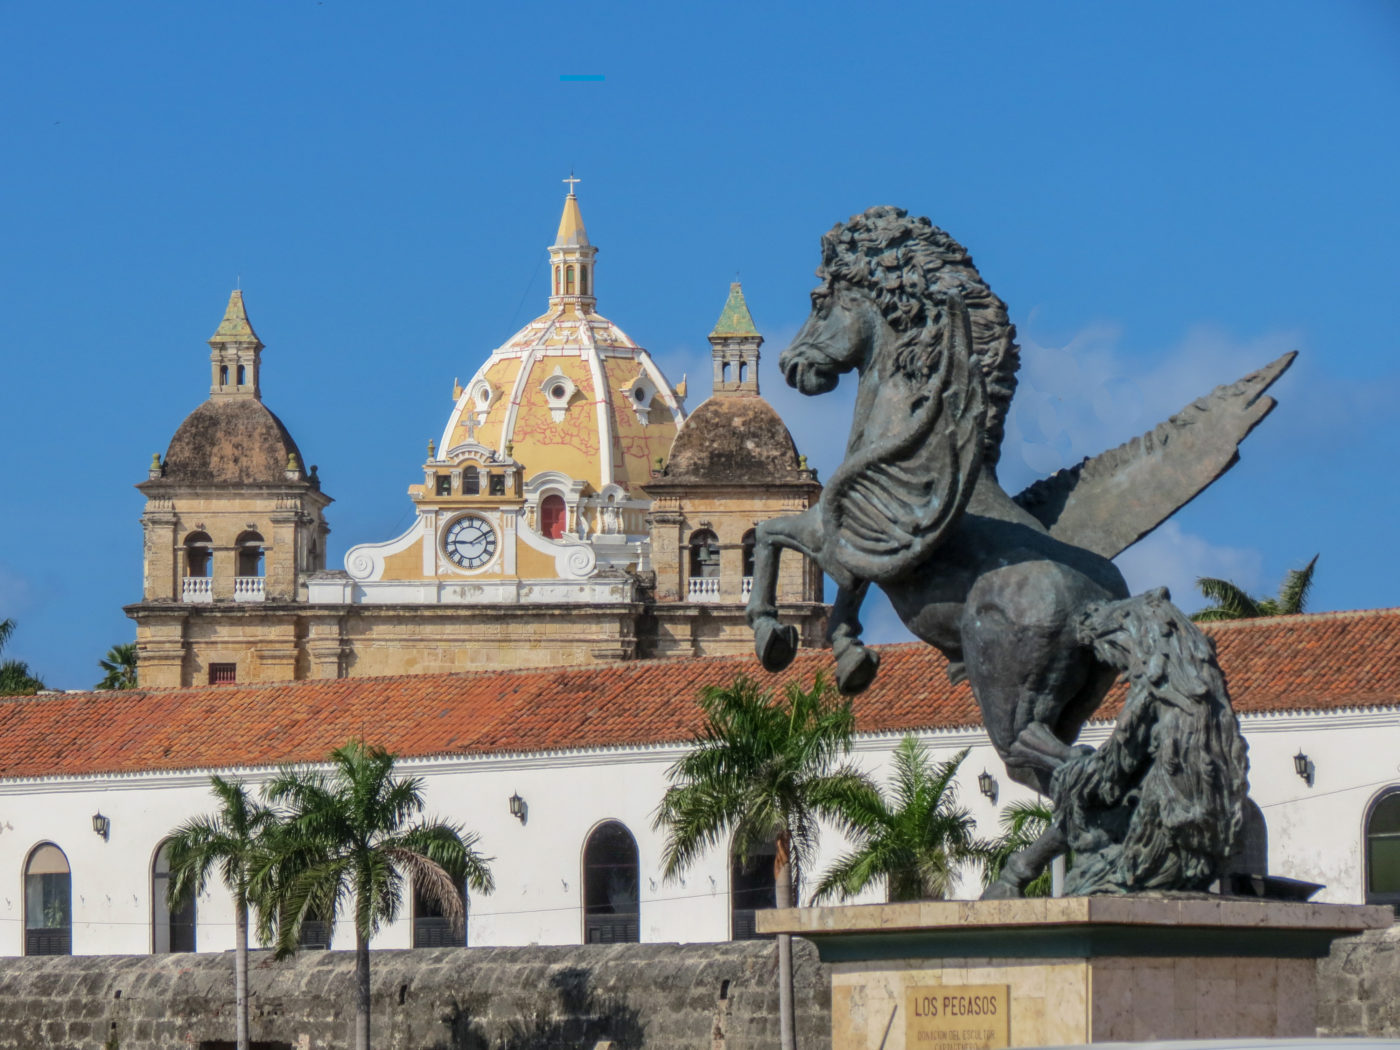 Cartagena Old Town Walking Tour – The Jewel of the Caribbean